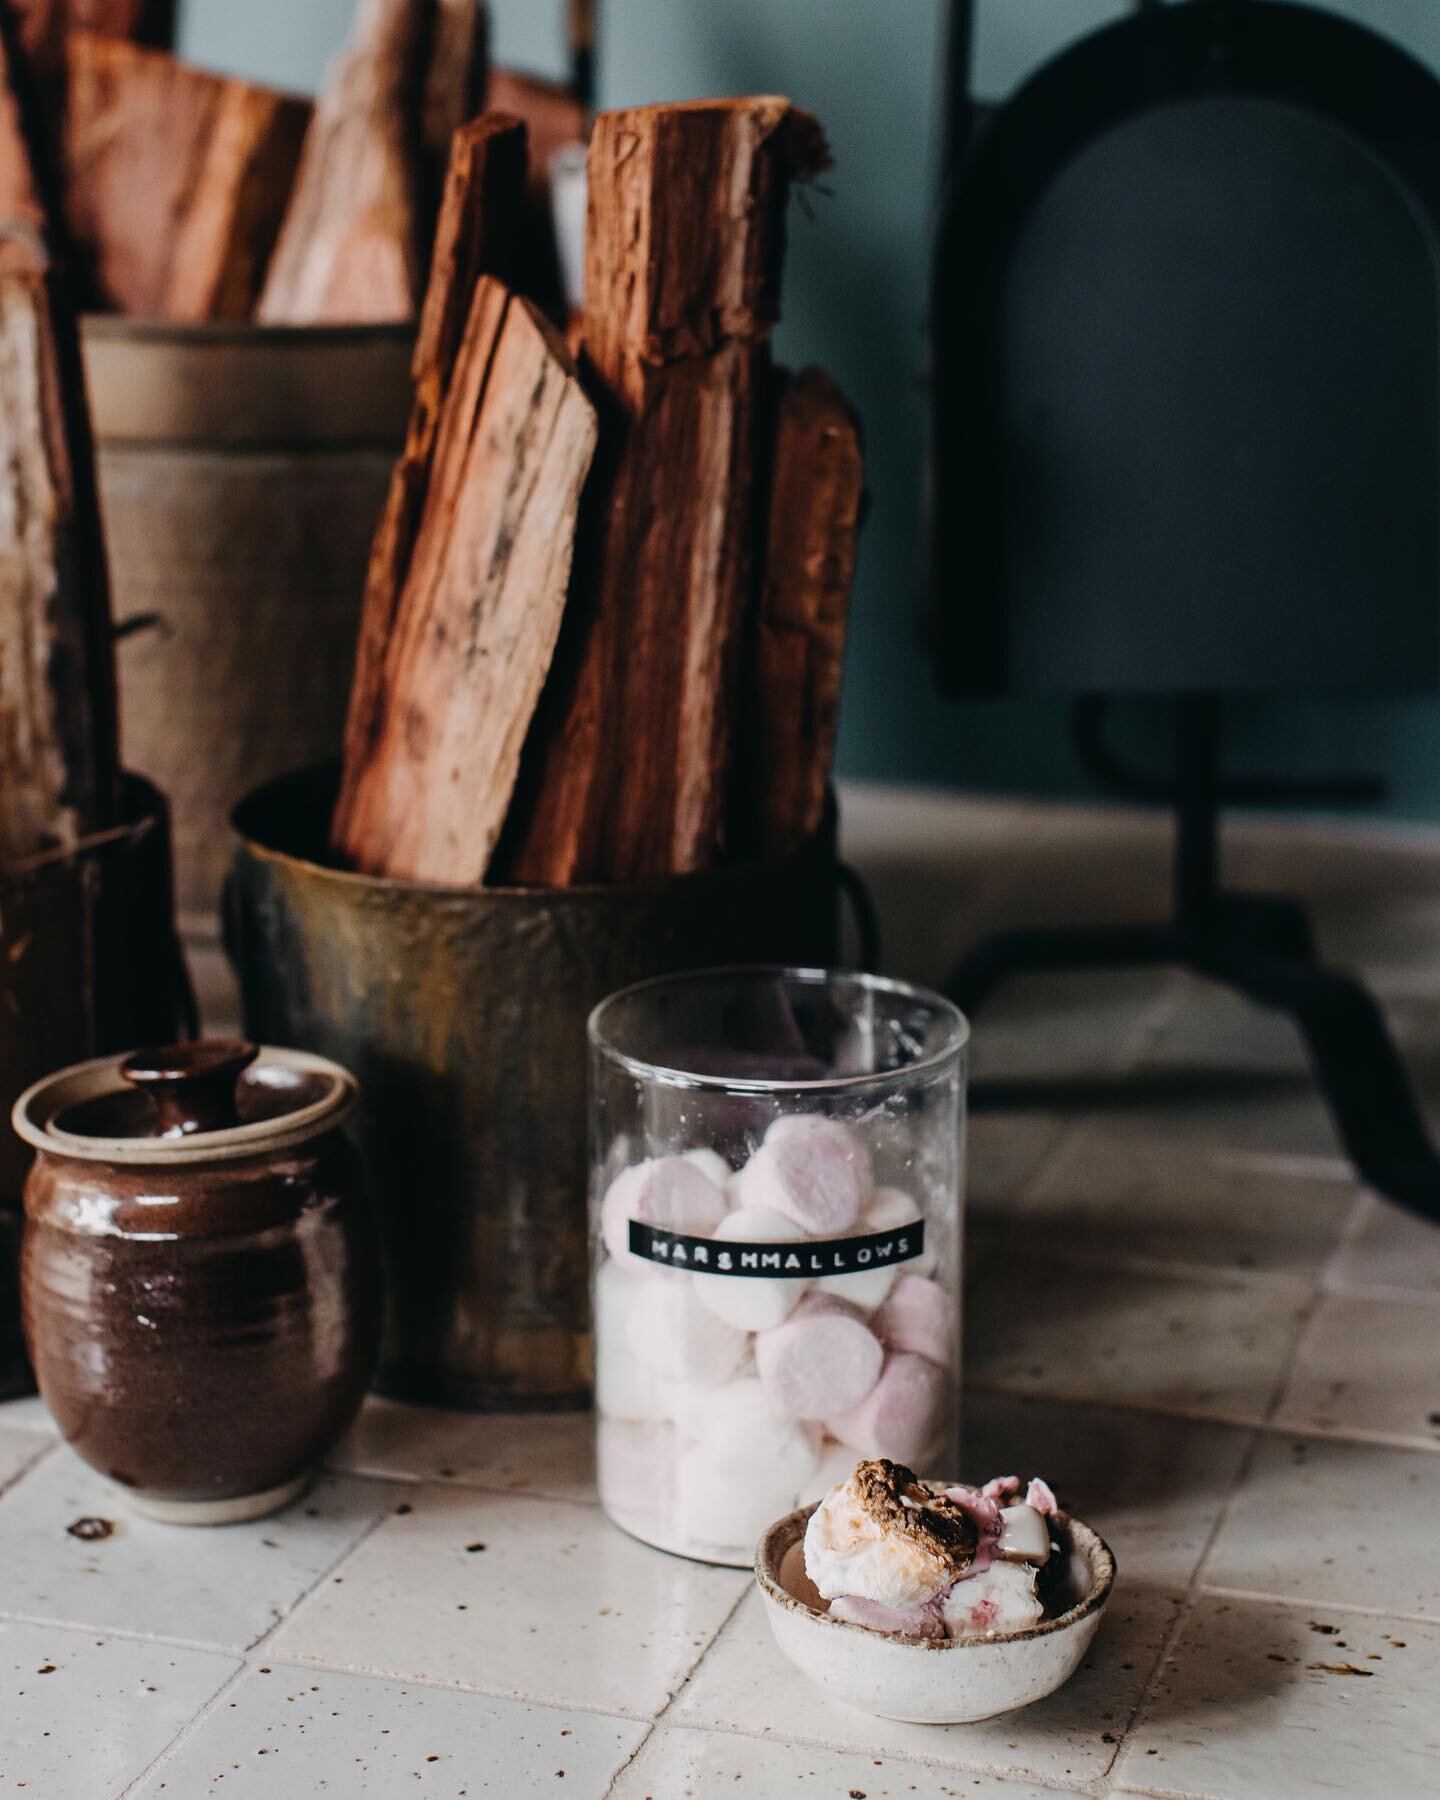 Crackling fire, mugs of decadent (vegan) @groundedpleasures hot choc and toasty marshmallows makes for the cosiest days and nights at Stillwood 〰️

Embracing our first winter season to its fullest here in beautiful Denmark!

#stayatstillwood #stillwo